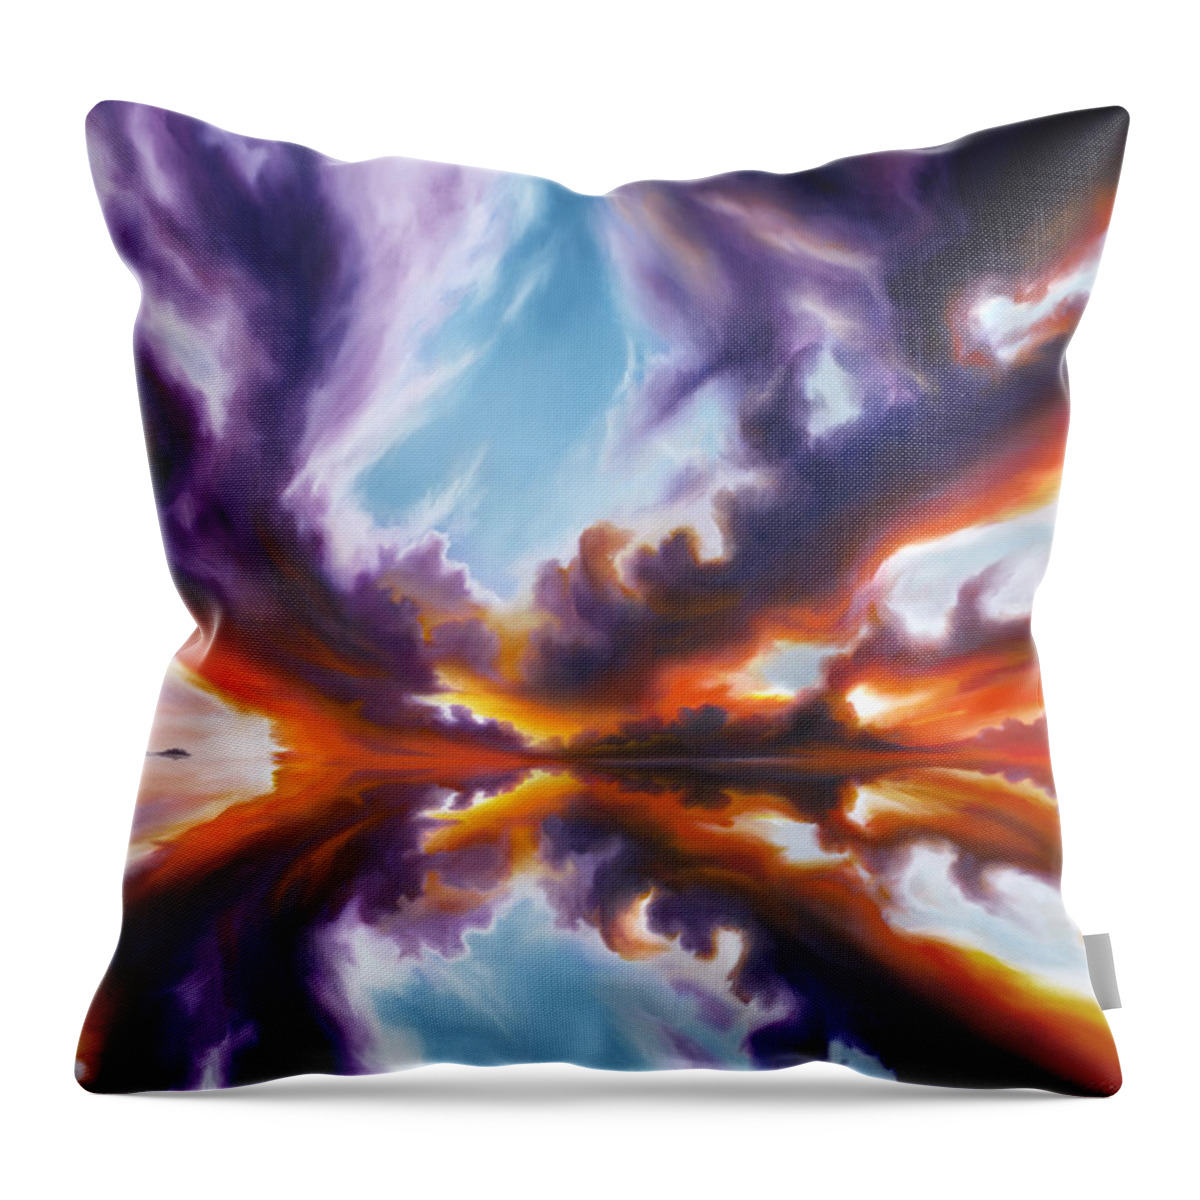 Bright Clouds; Sunsets; Reflections; Ocean; Water; Purple; Orange; Storms; Lightning; Contemporary; Abstract; Realism; James Christopher Hill; James Hill Studios; James C. Hill Throw Pillow featuring the painting Reflections of the Mind by James Hill